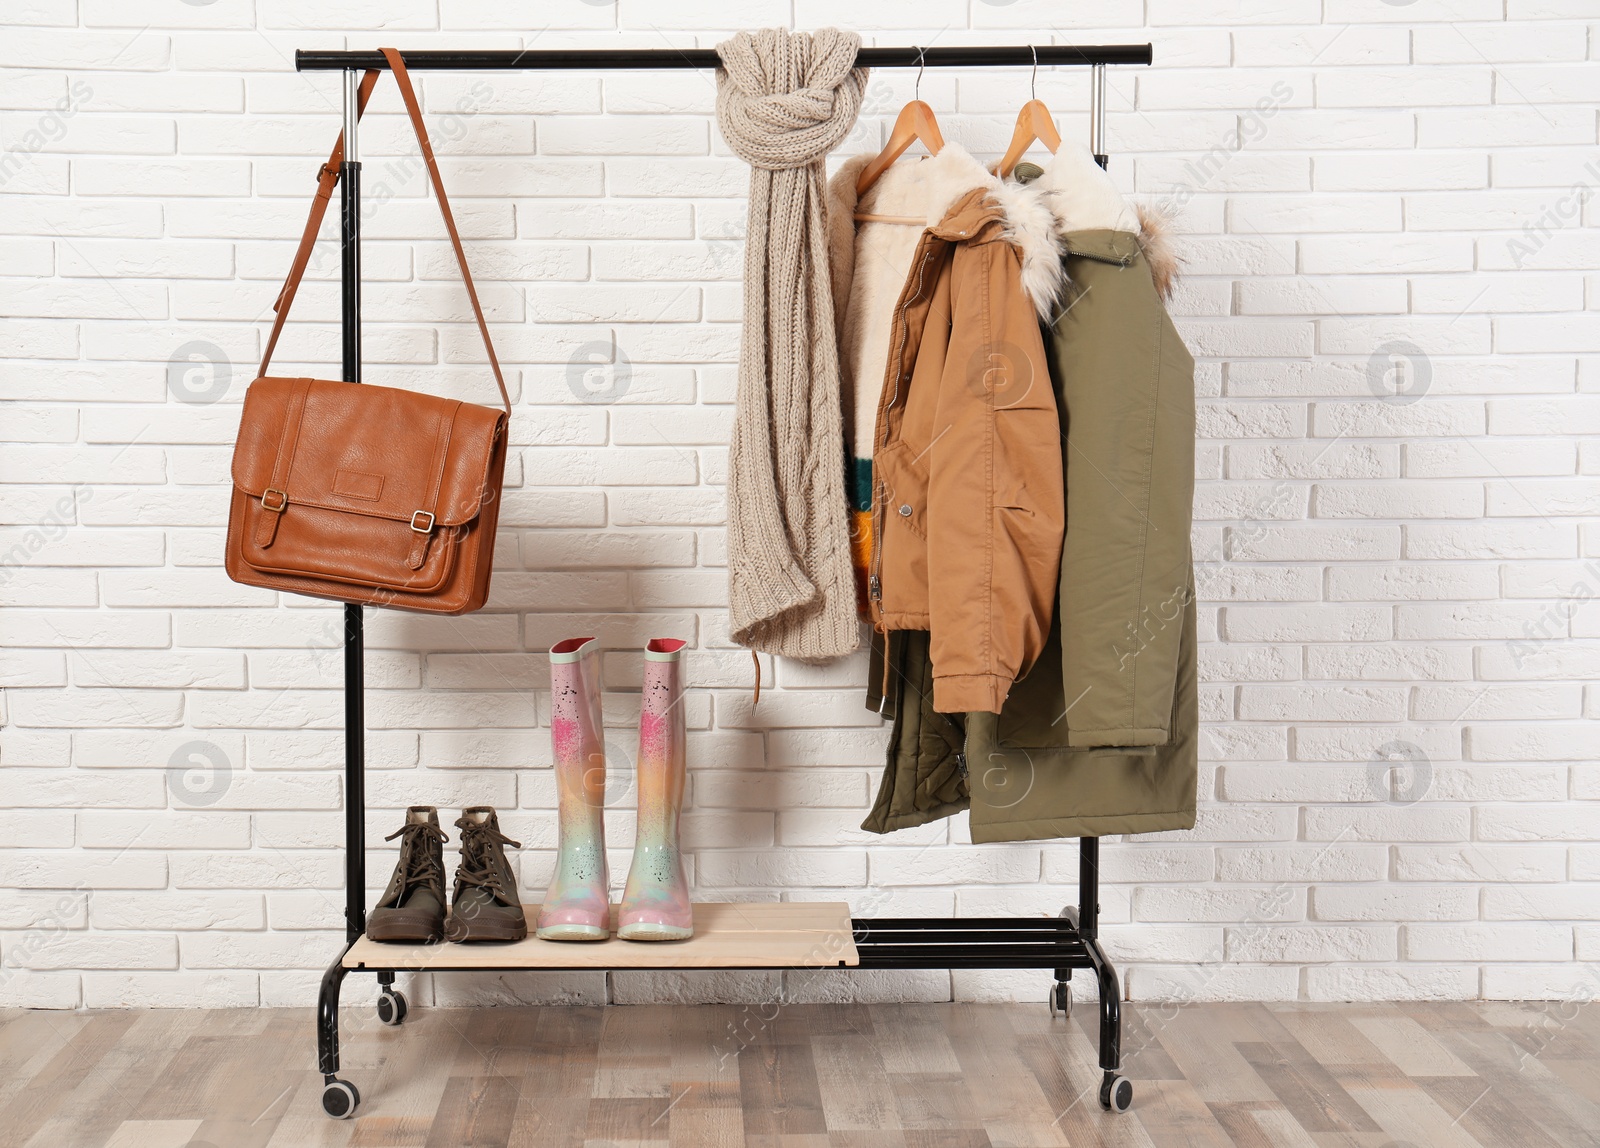 Photo of Shoes and clothes on hanger stand against brick wall. Idea for interior decor